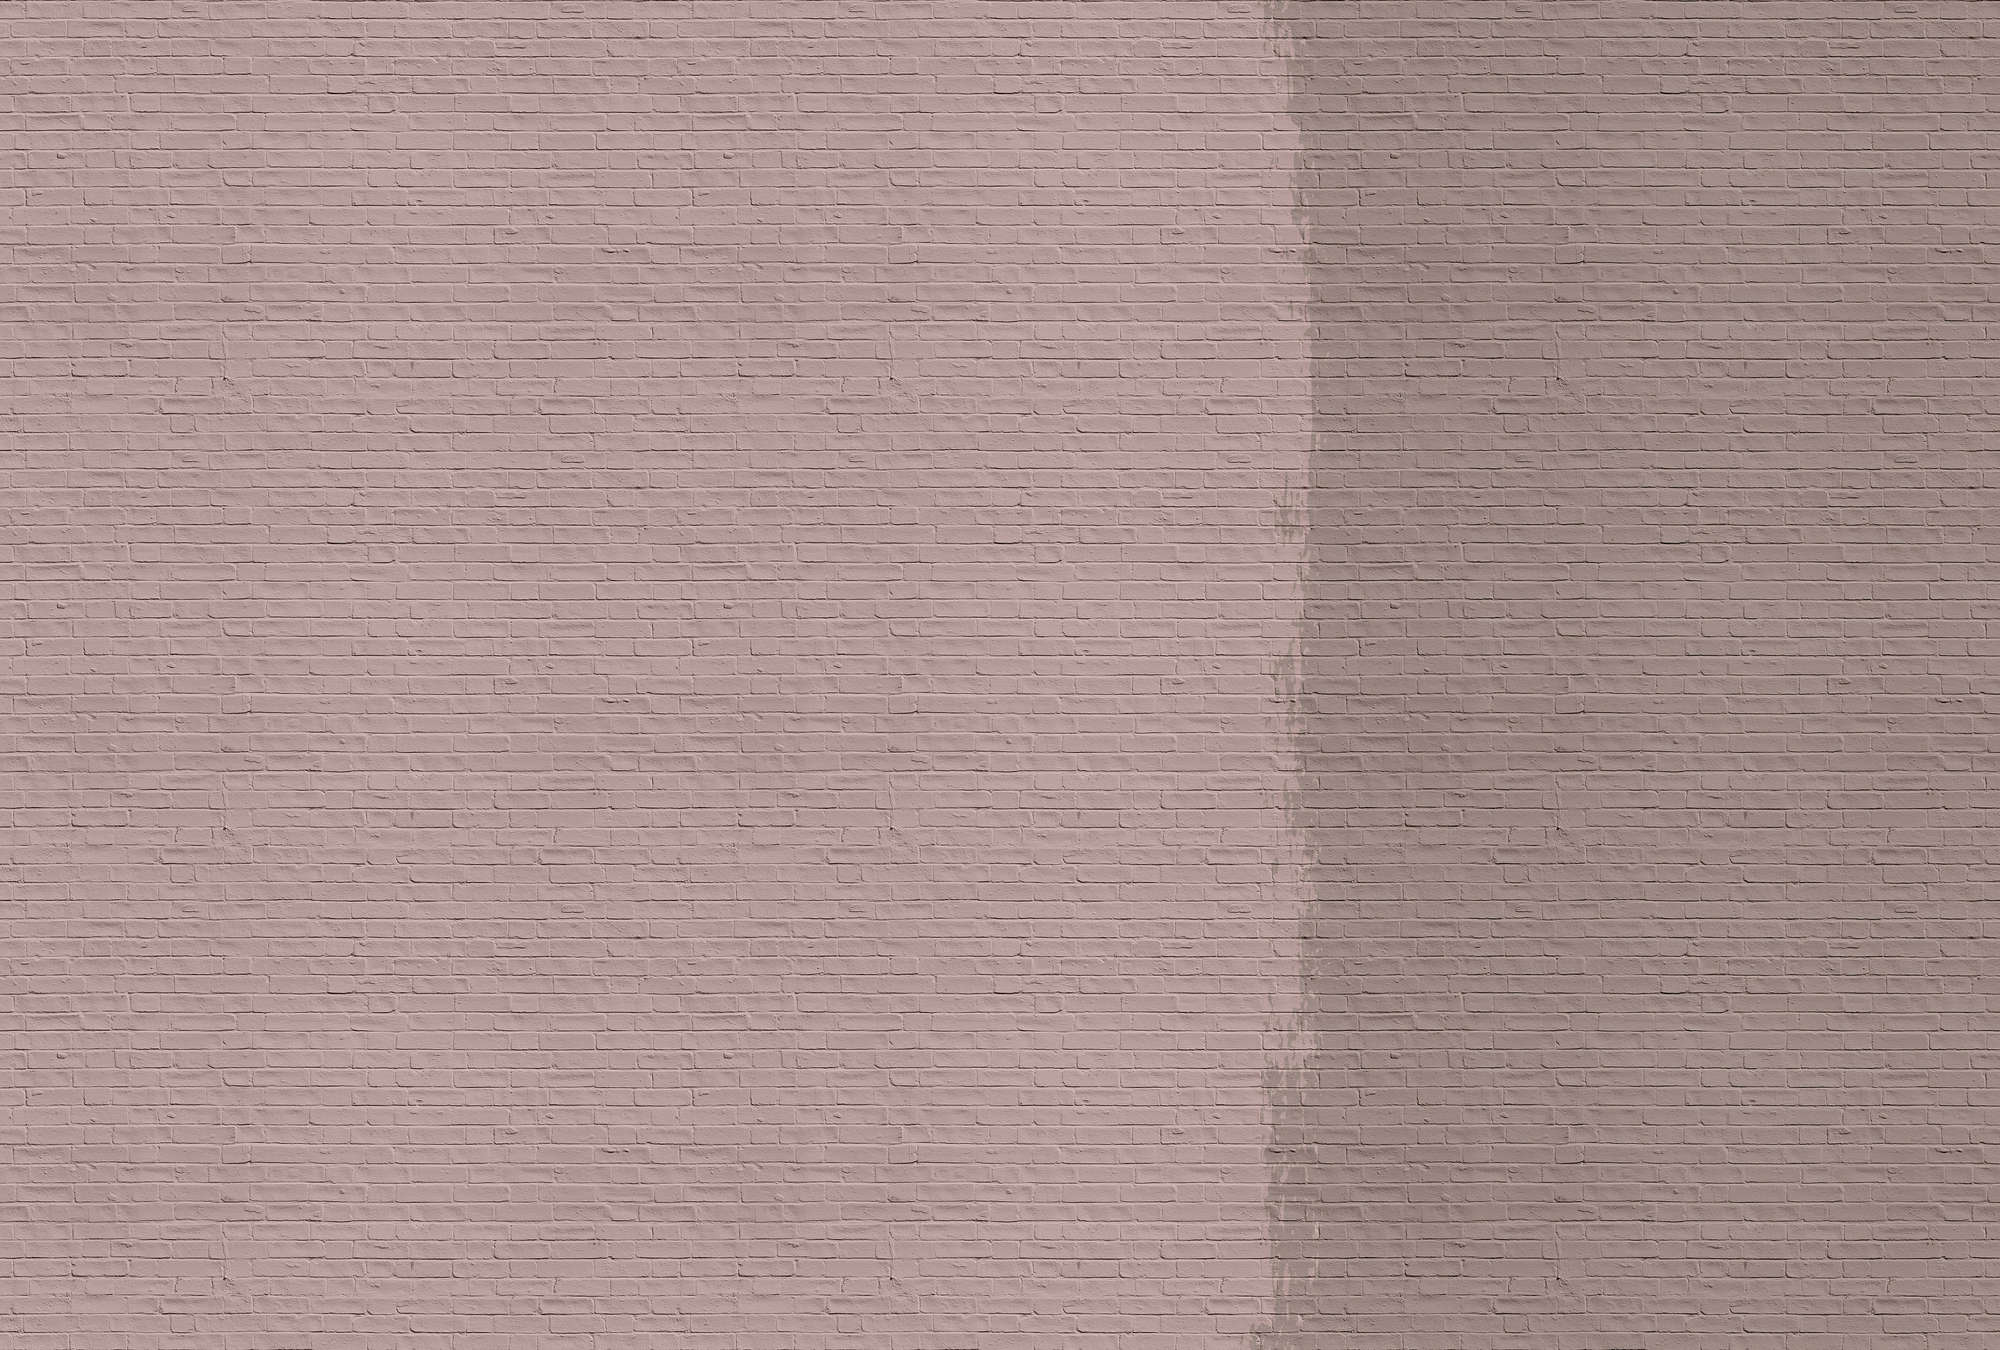             Tainted love 2 - Painted brick wall mural - Pink, Taupe | Matt smooth fleece
        